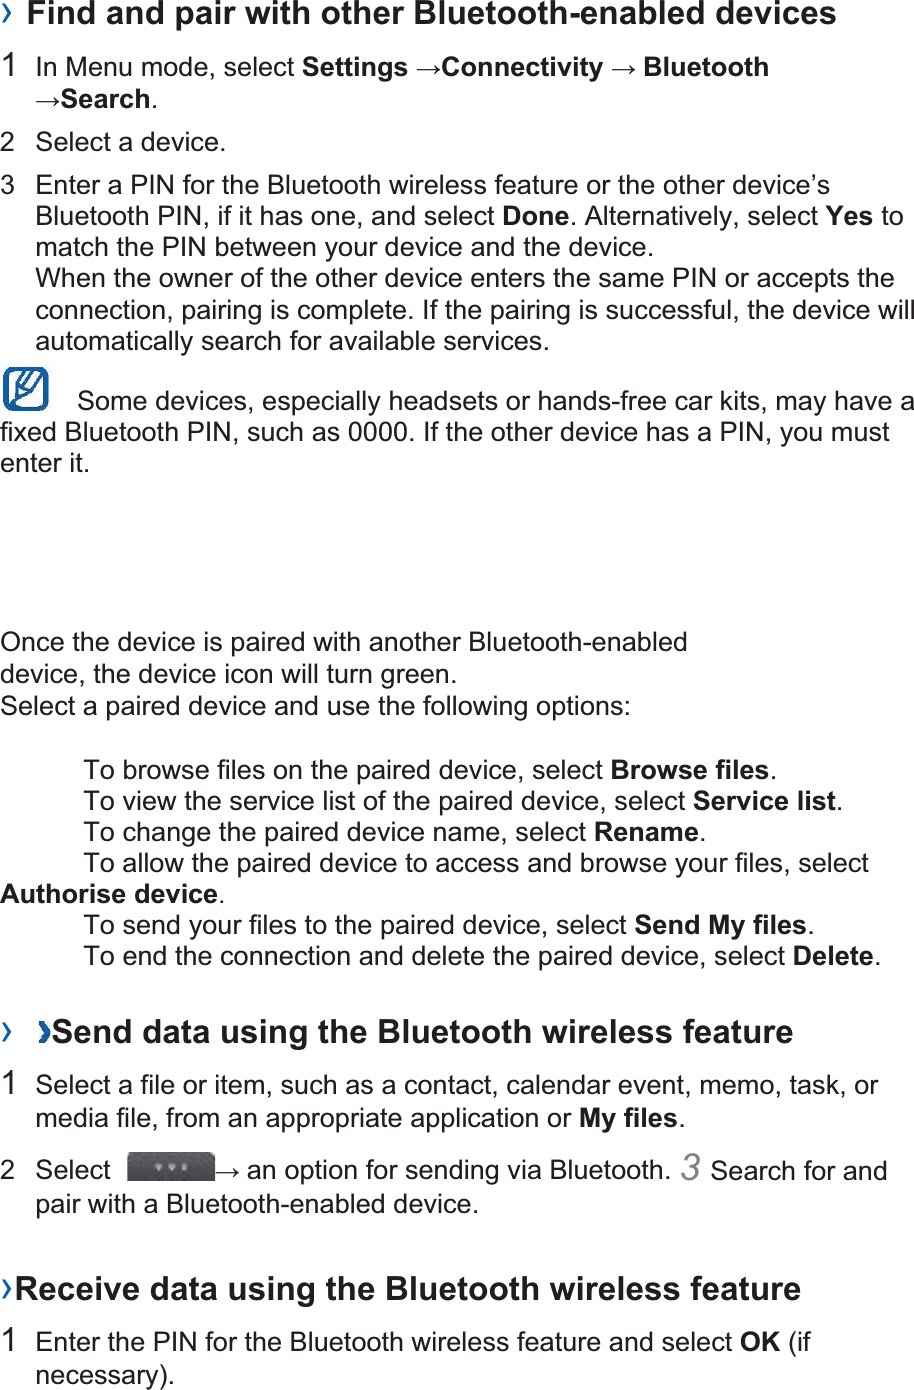 › Find and pair with other Bluetooth-enabled devices   1  In Menu mode, select Settings Connectivity  BluetoothSearch.  2  Select a device.   3  Enter a PIN for the Bluetooth wireless feature or the other device’s Bluetooth PIN, if it has one, and select Done. Alternatively, select Yes to match the PIN between your device and the device.   When the owner of the other device enters the same PIN or accepts the connection, pairing is complete. If the pairing is successful, the device will automatically search for available services.     Some devices, especially headsets or hands-free car kits, may have a fixed Bluetooth PIN, such as 0000. If the other device has a PIN, you must enter it.   Once the device is paired with another Bluetooth-enabled device, the device icon will turn green. Select a paired device and use the following options:    To browse files on the paired device, select Browse files.    To view the service list of the paired device, select Service list.    To change the paired device name, select Rename.   To allow the paired device to access and browse your files, select Authorise device.    To send your files to the paired device, select Send My files.    To end the connection and delete the paired device, select Delete.   ›  Send data using the Bluetooth wireless feature   1  Select a file or item, such as a contact, calendar event, memo, task, or media file, from an appropriate application or My files.  2 Select   an option for sending via Bluetooth. 3Search for and pair with a Bluetooth-enabled device.   ›Receive data using the Bluetooth wireless feature   1  Enter the PIN for the Bluetooth wireless feature and select OK (if necessary).  